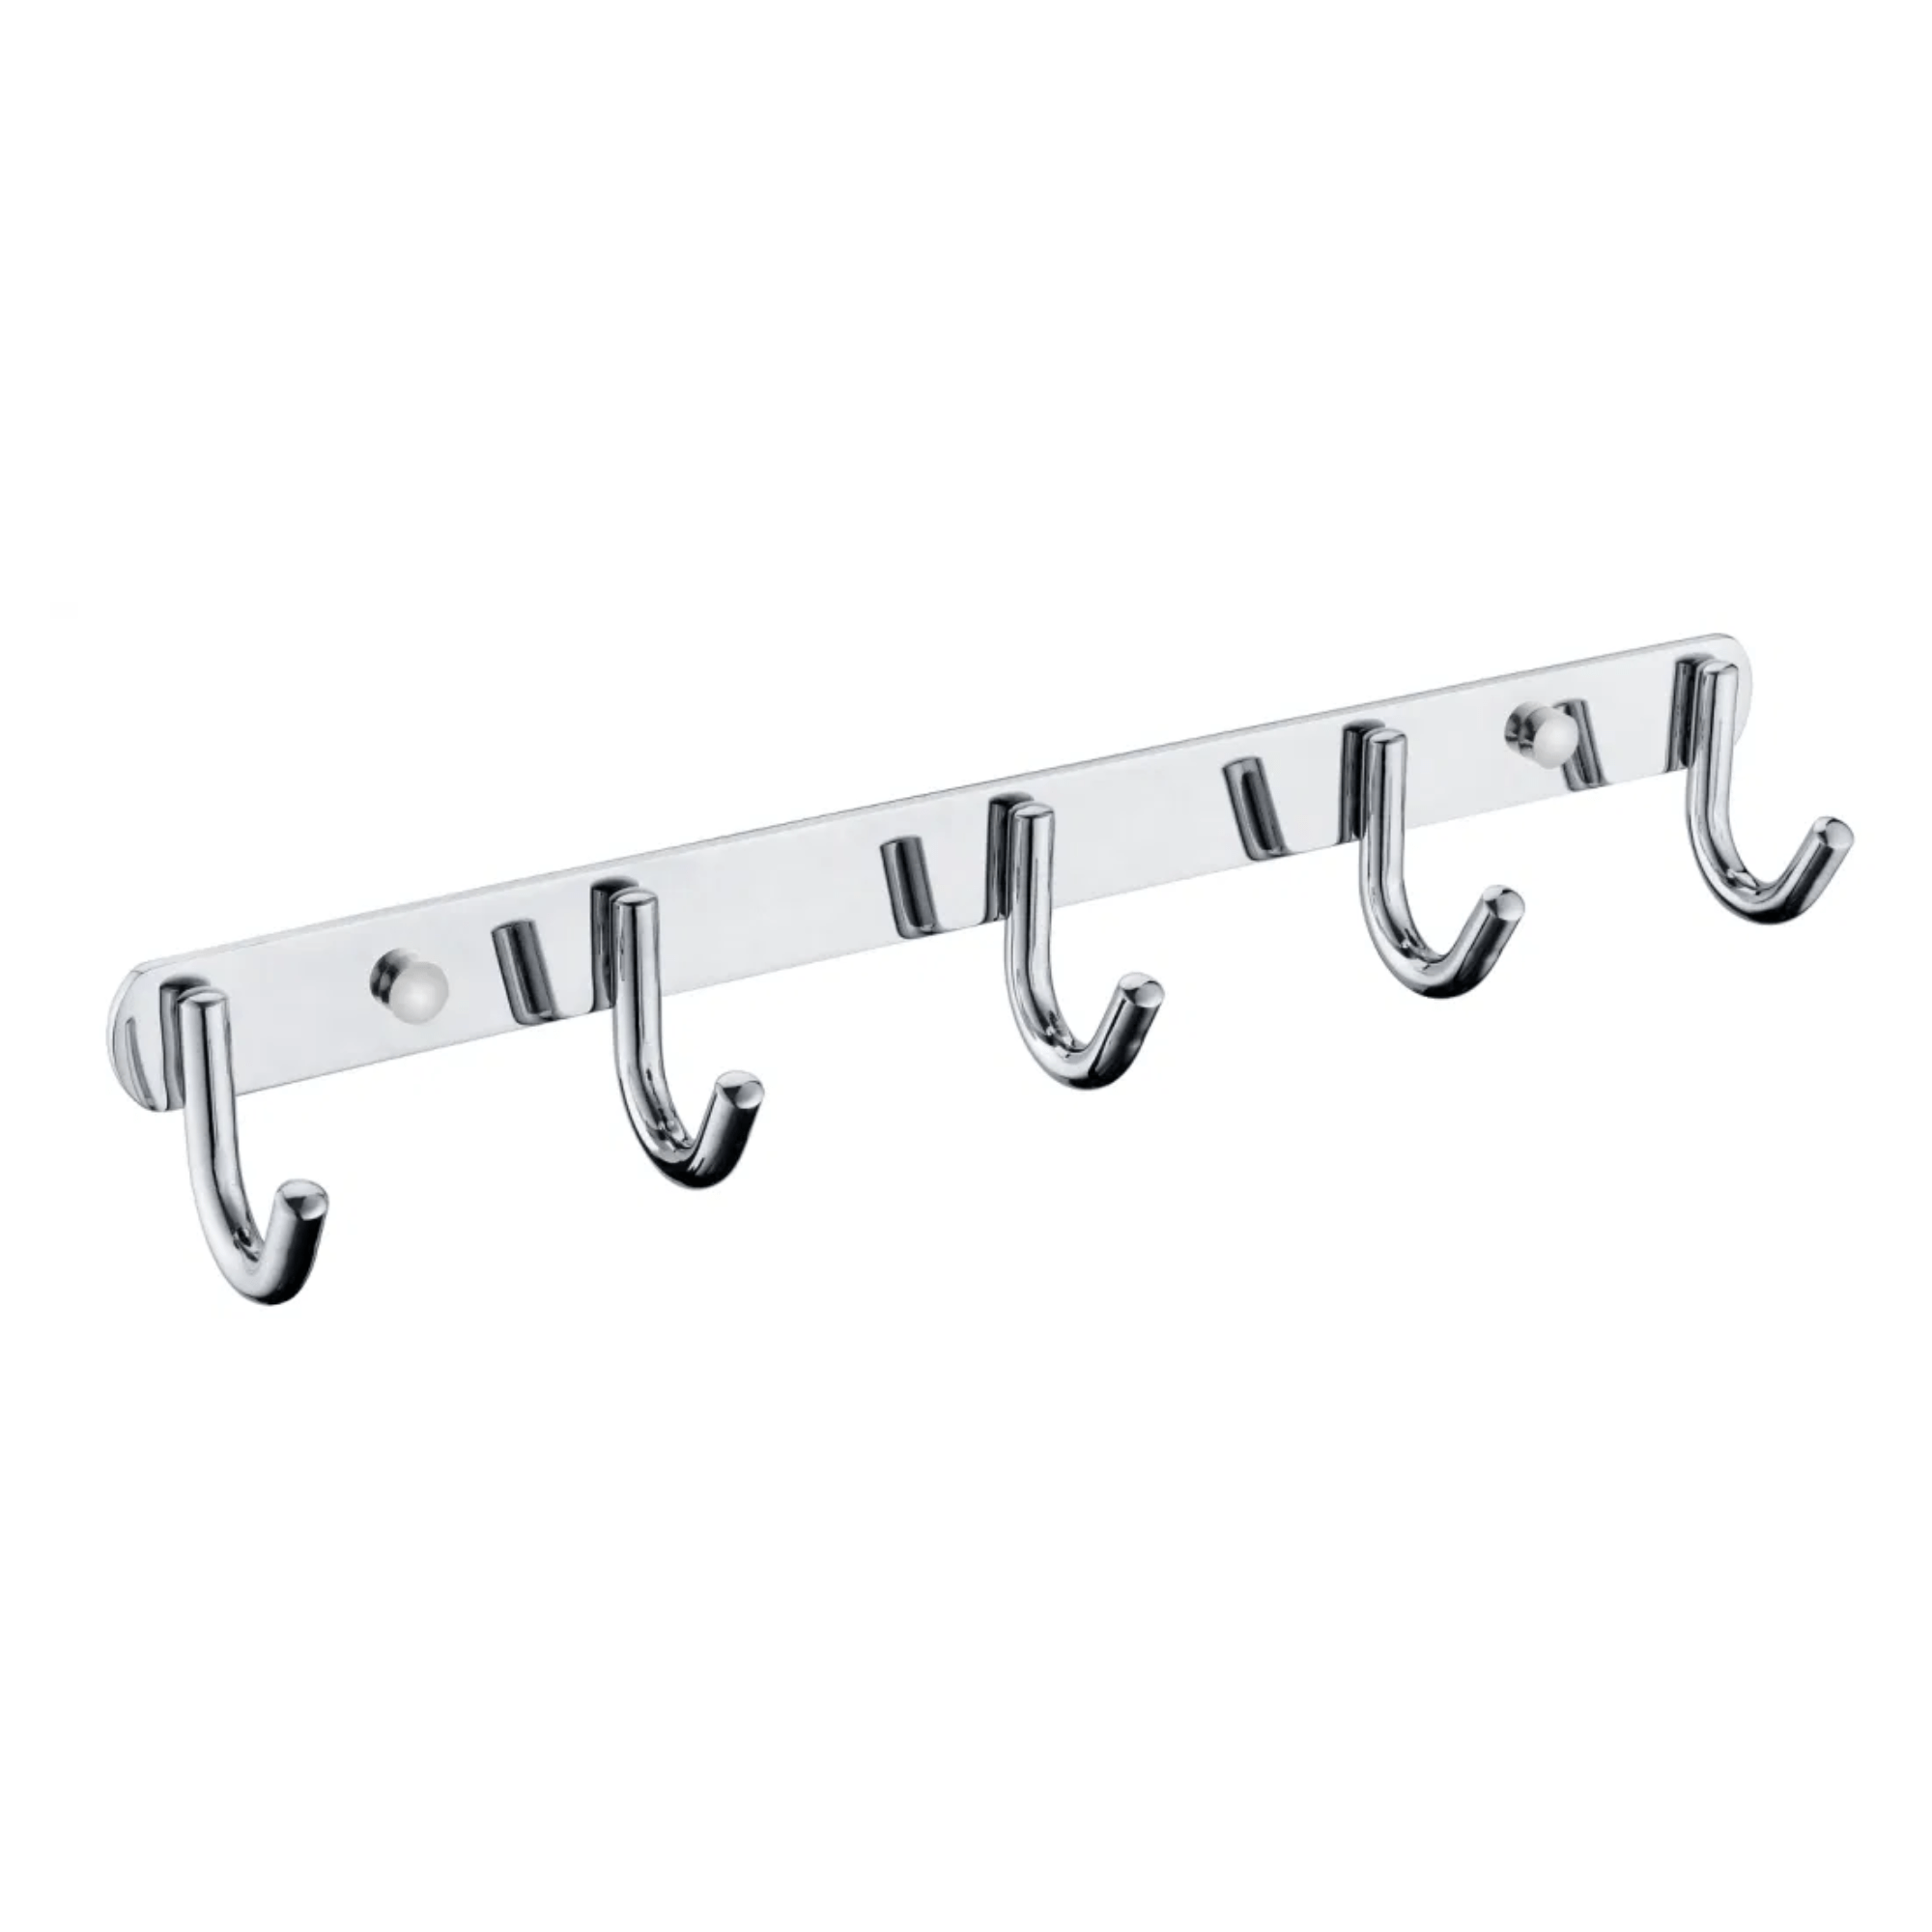 Shop Bathroom Stainless Steel Chrome Hook Rail - 3, 4, or 5 Hooks | Buy Online at Supply Master Accra, Ghana Bathroom Accessories 5-Hooks Buy Tools hardware Building materials